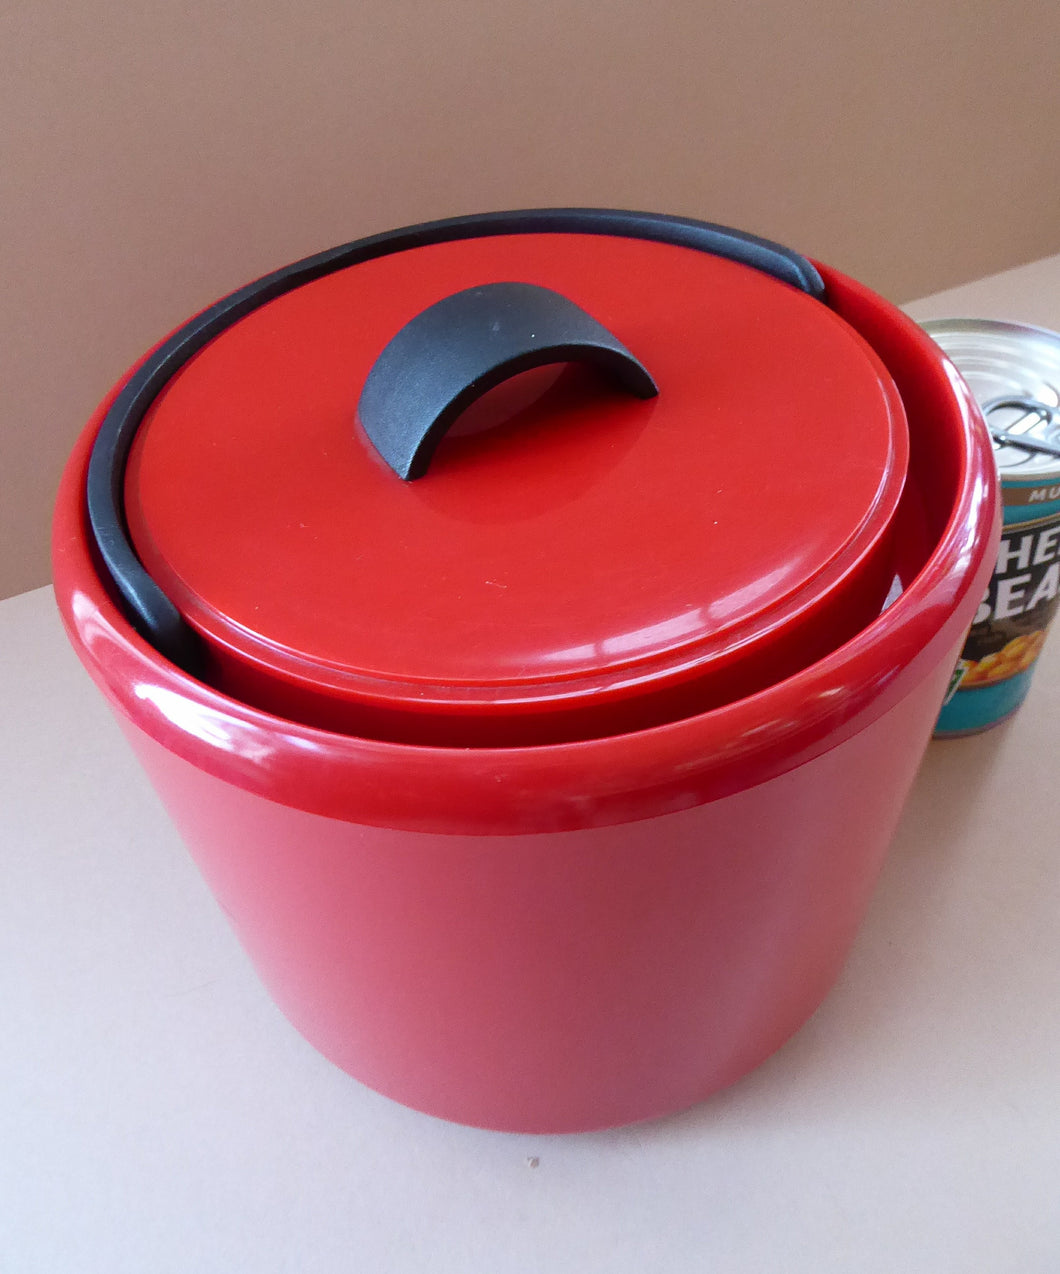 1970s BODUM JORGENSEN Red and Black Plastic Ice Bucket. Fabulous Styling with Concealed Black Carry Handle